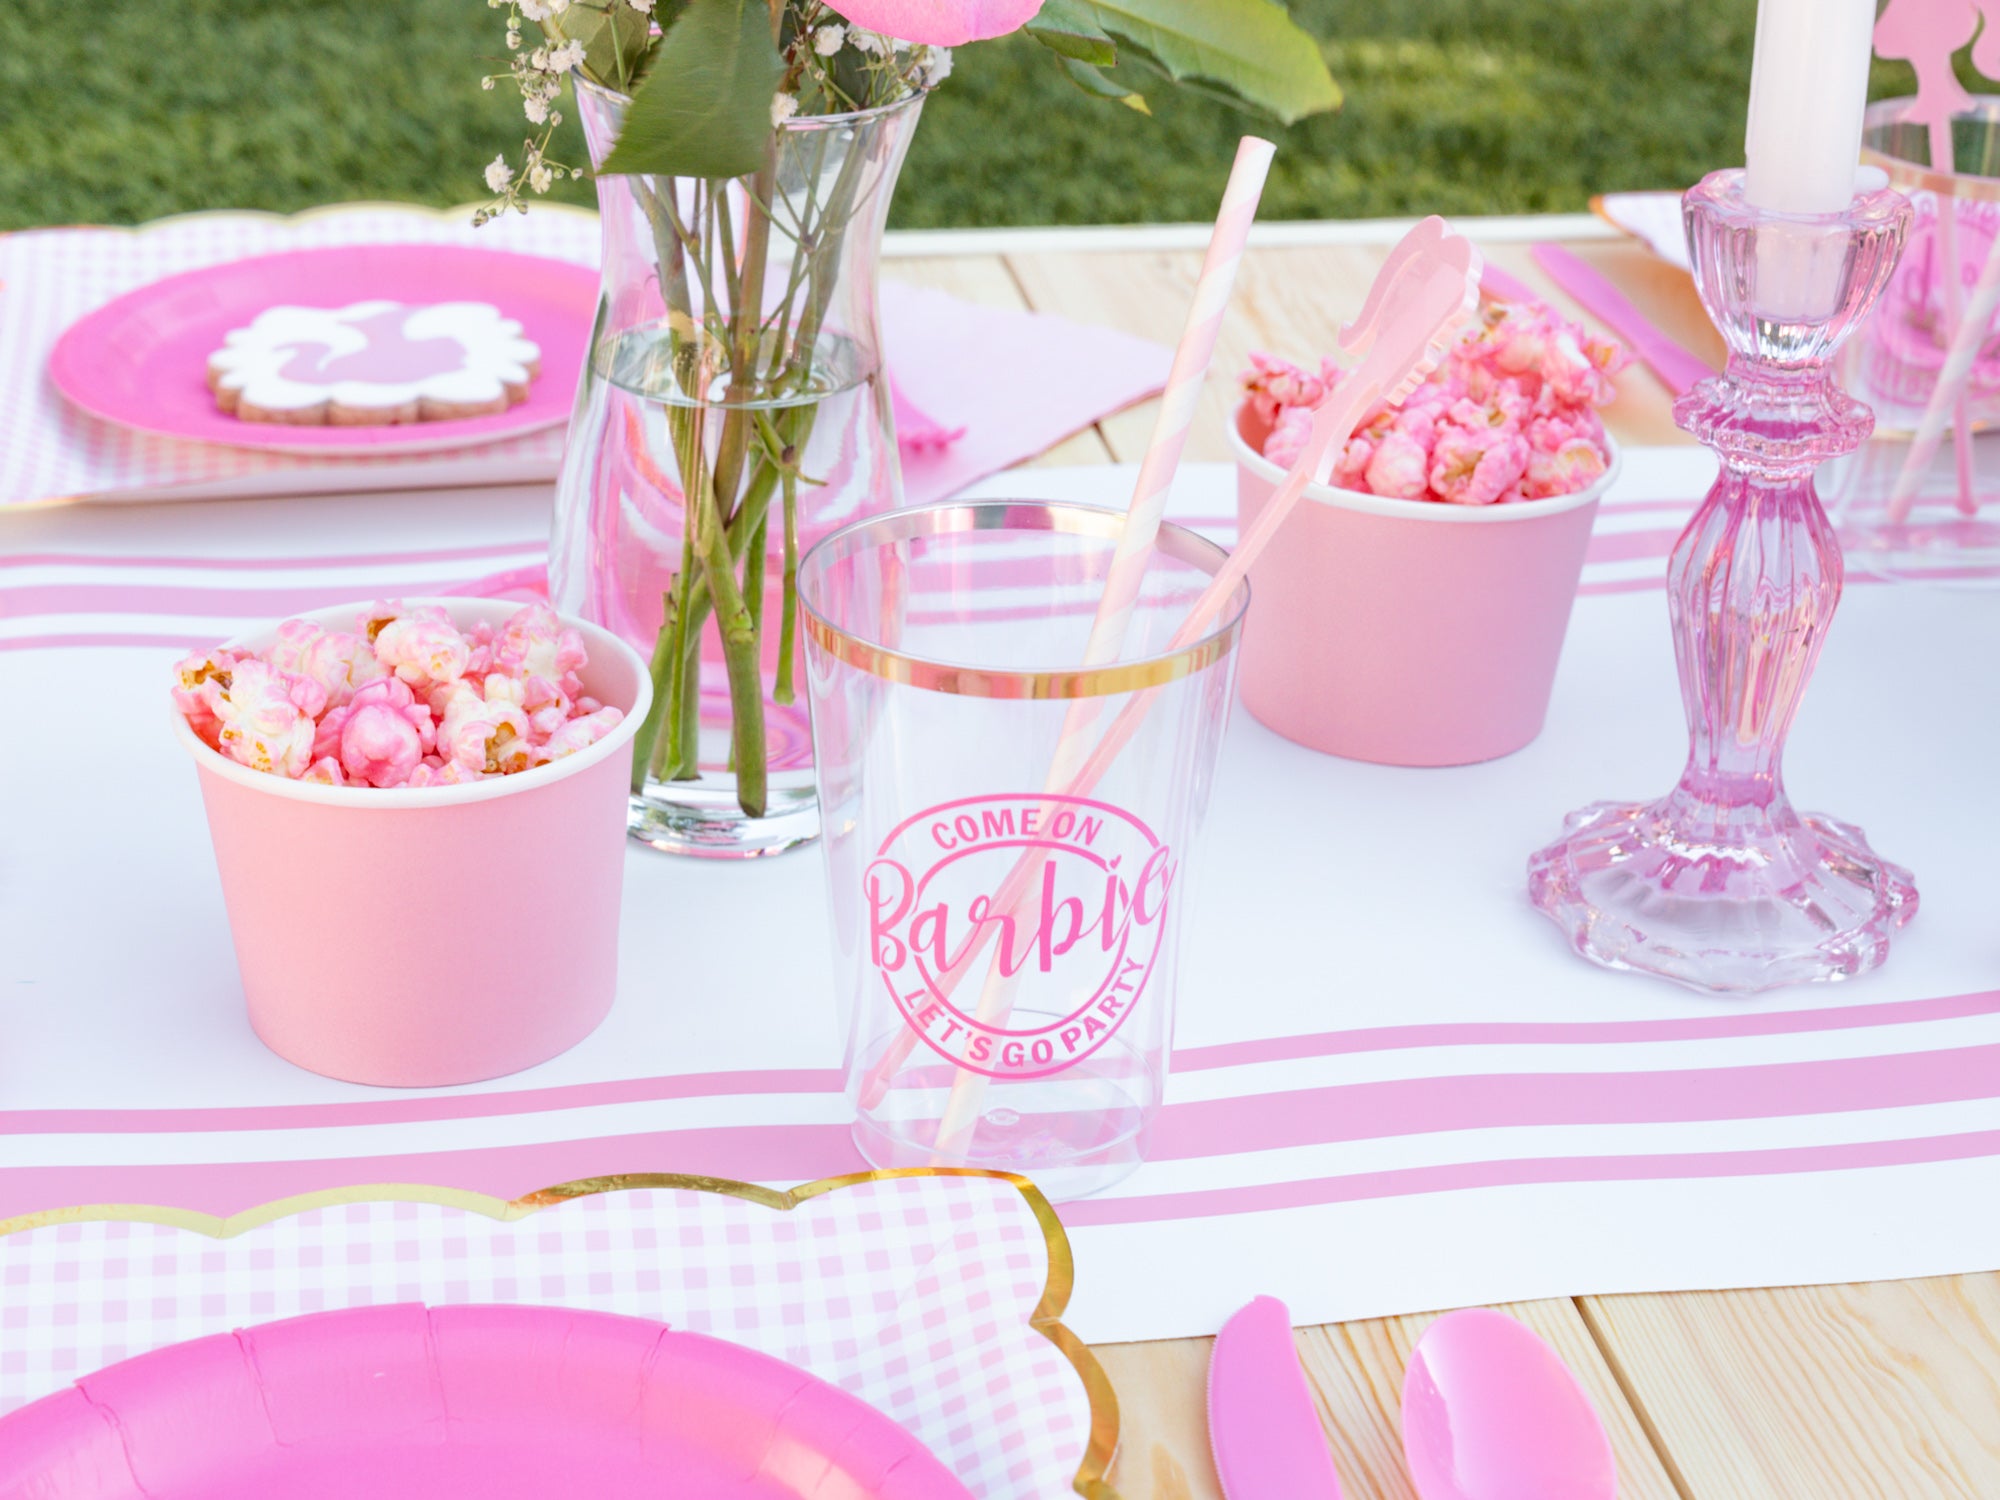 Barbie Decal Party Cup | The Party Darling